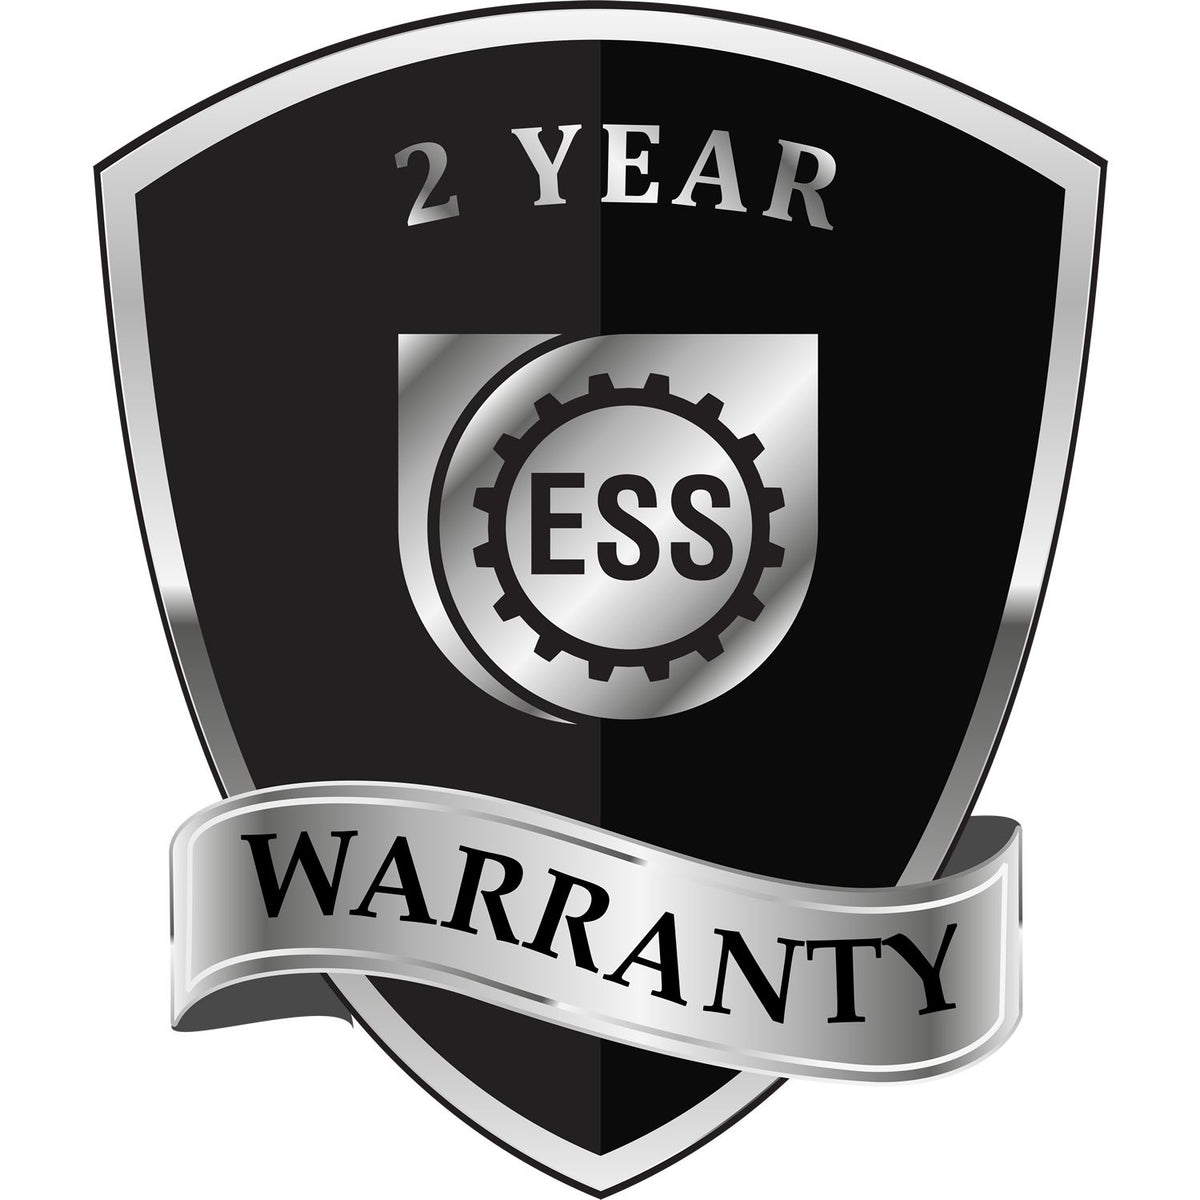 A badge or emblem showing a warranty icon for the North Carolina Engineer Desk Seal